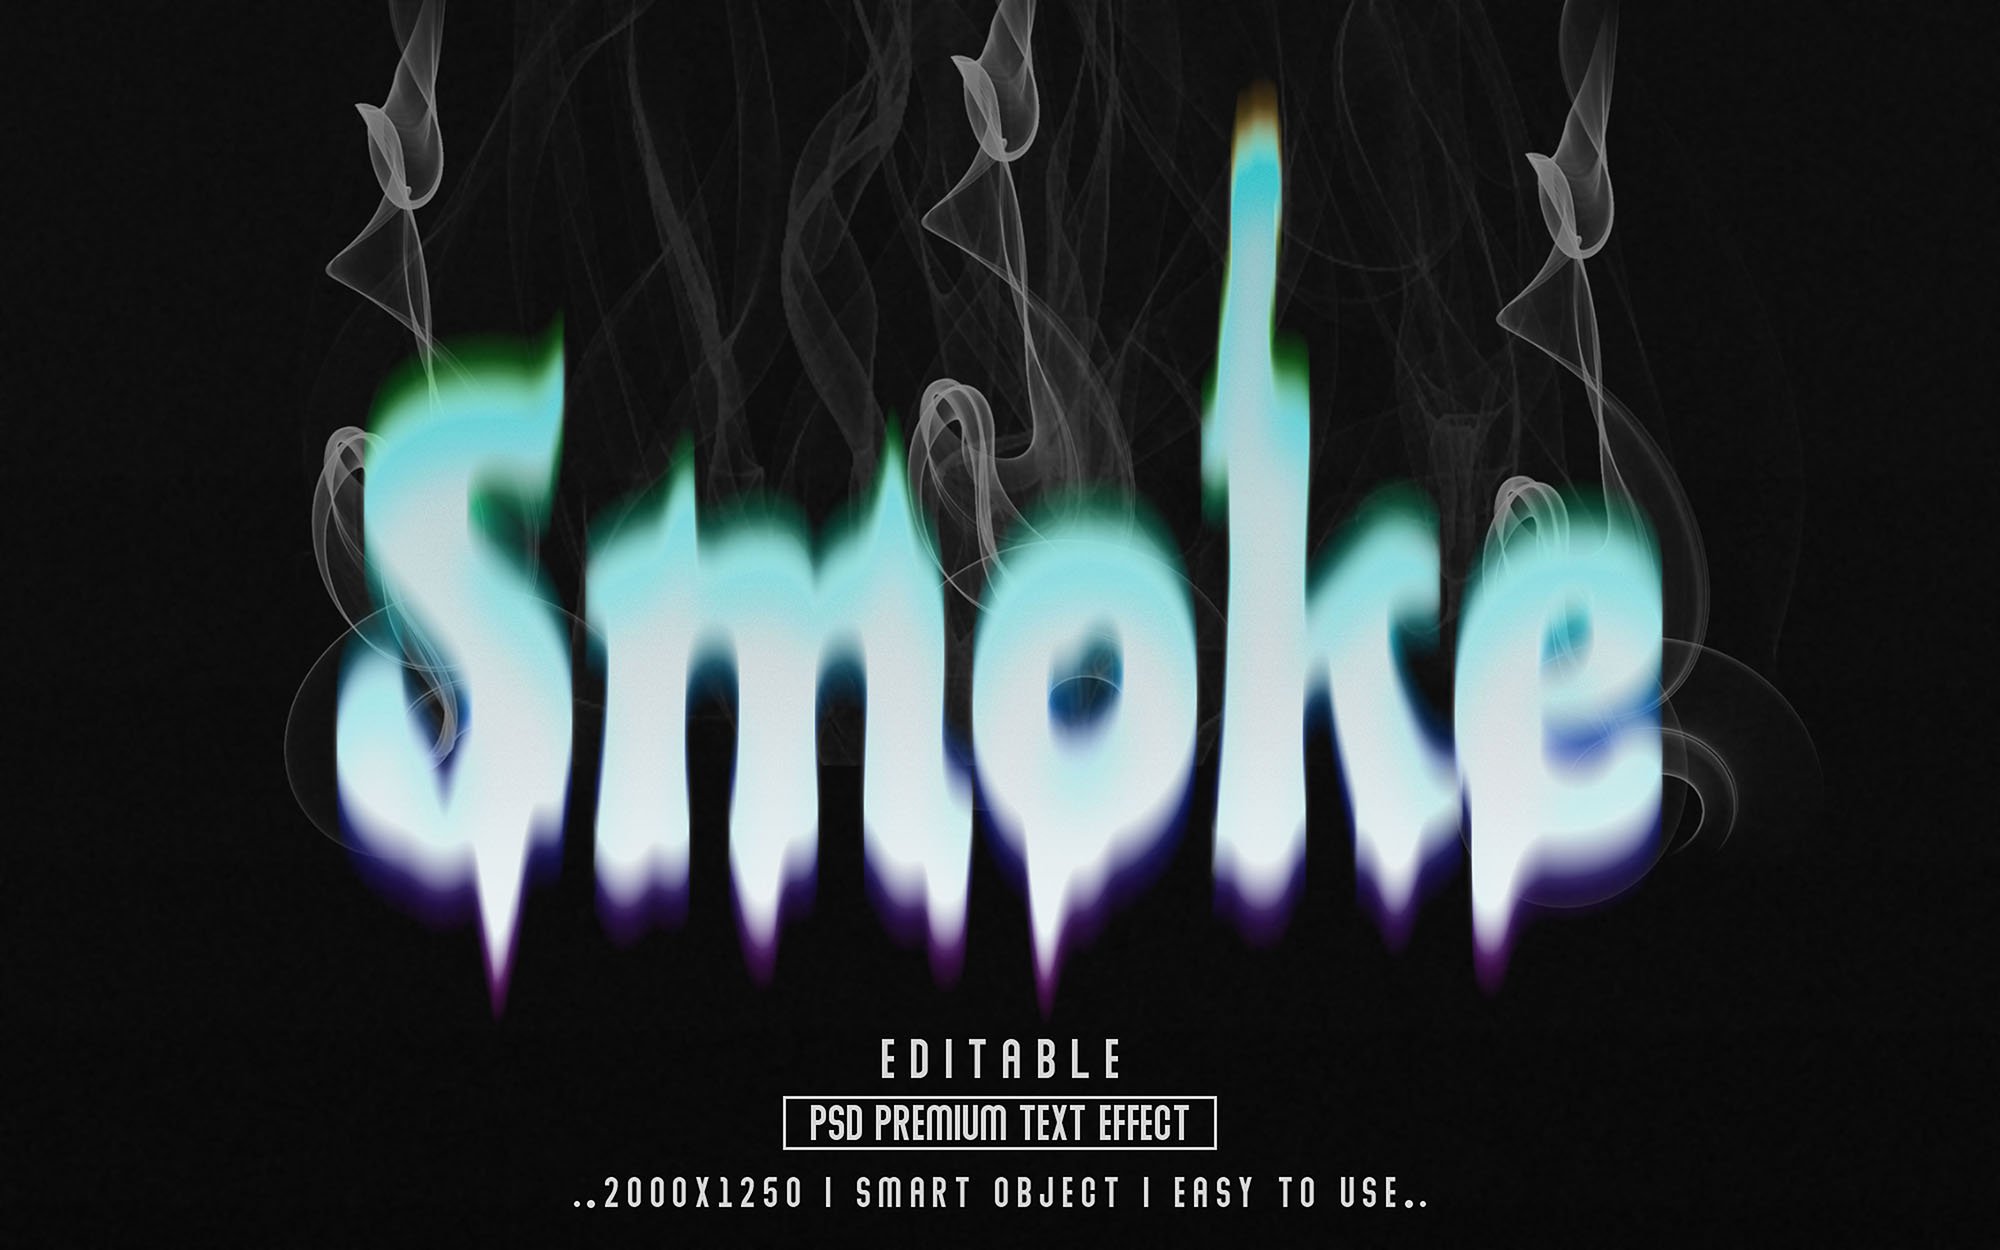 Smoke 3D Editable Text Effect stylecover image.